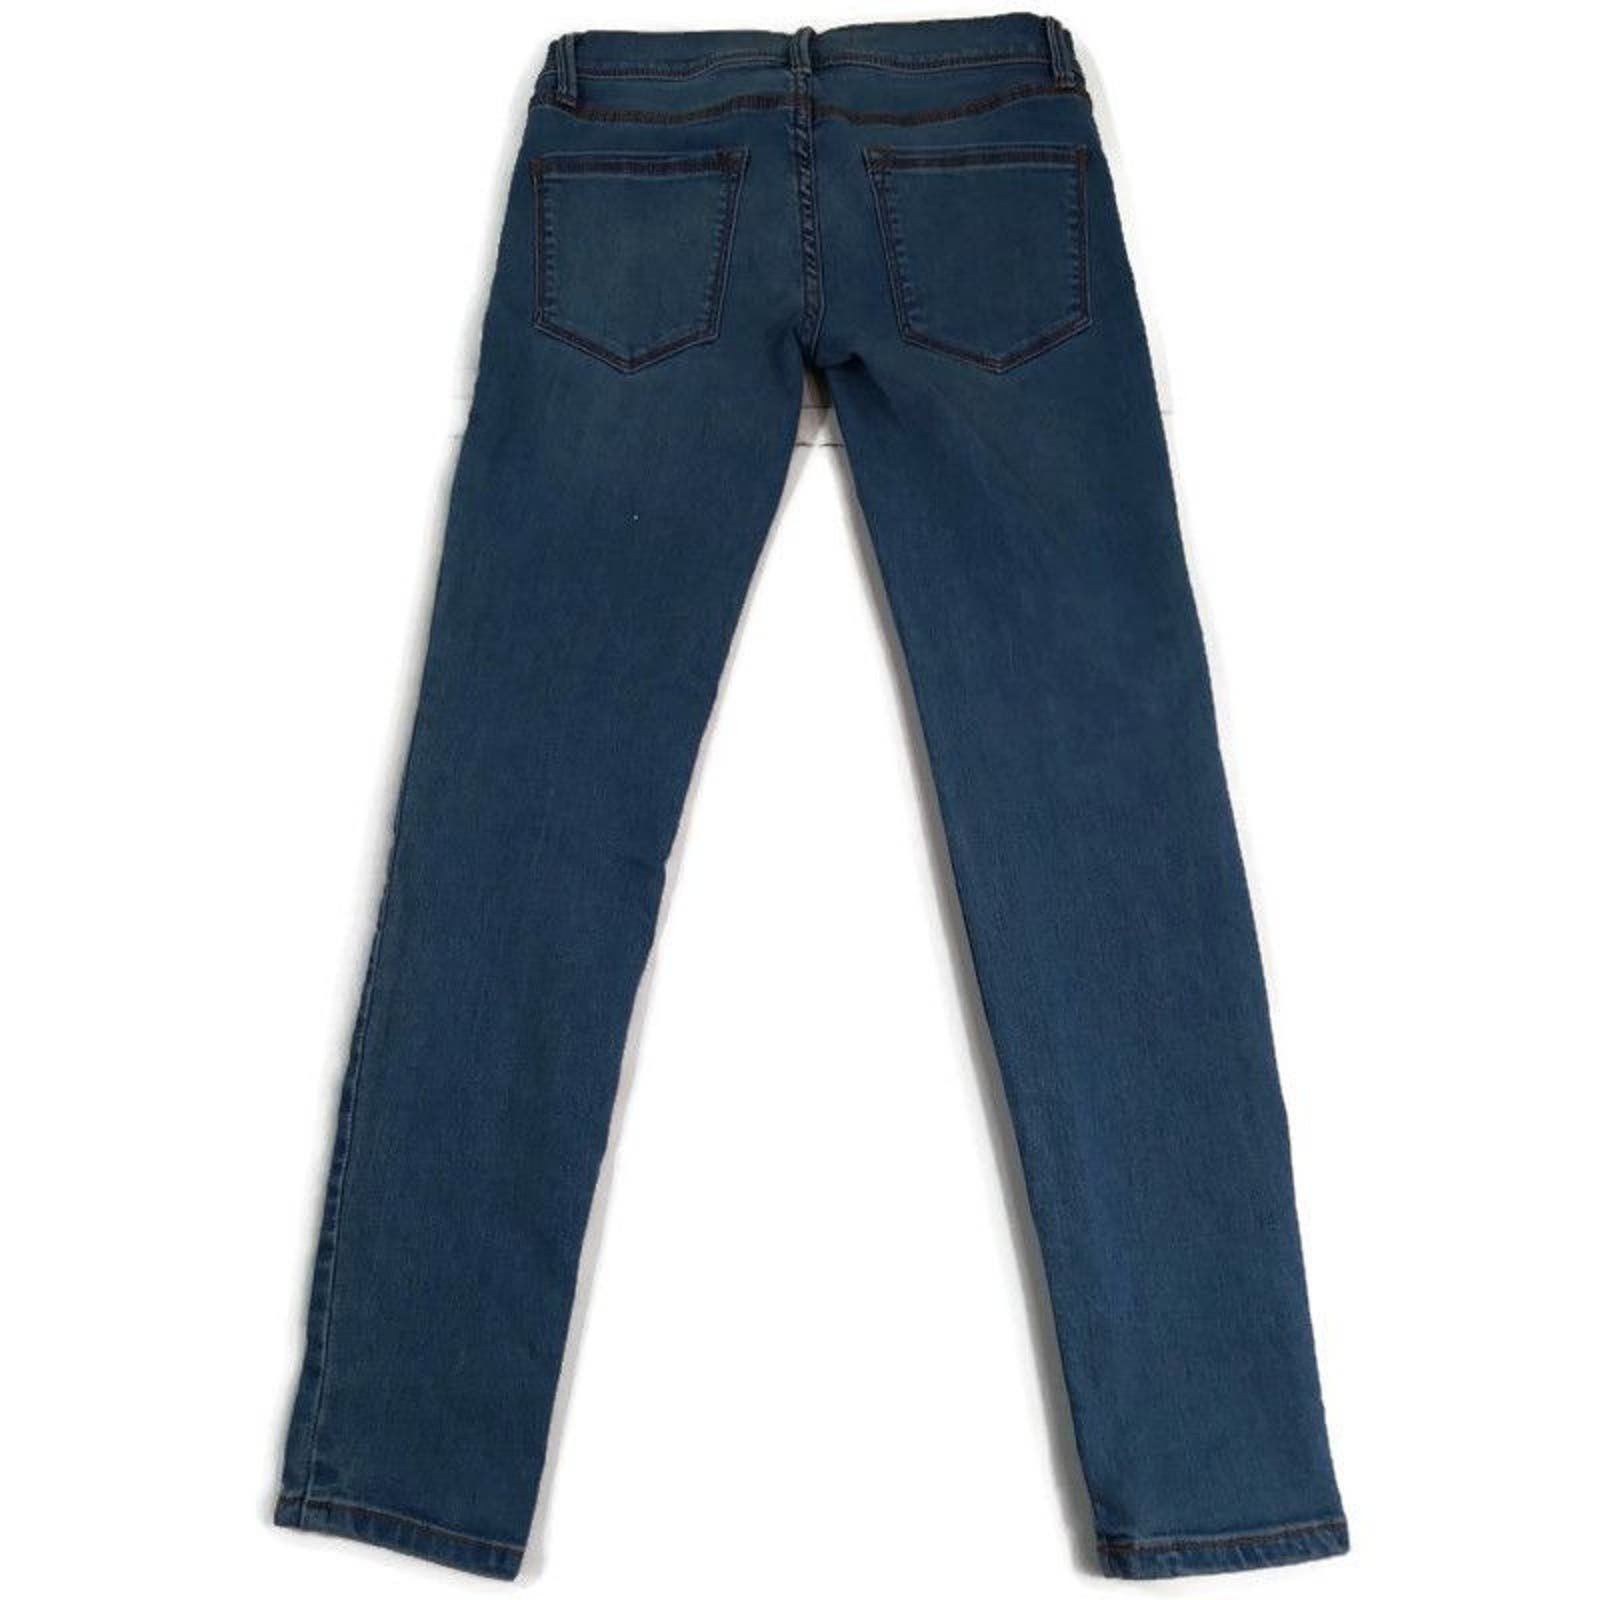 the Lowest price Free People Skinny Jeans size 25 fHNJI4fvl Store Online